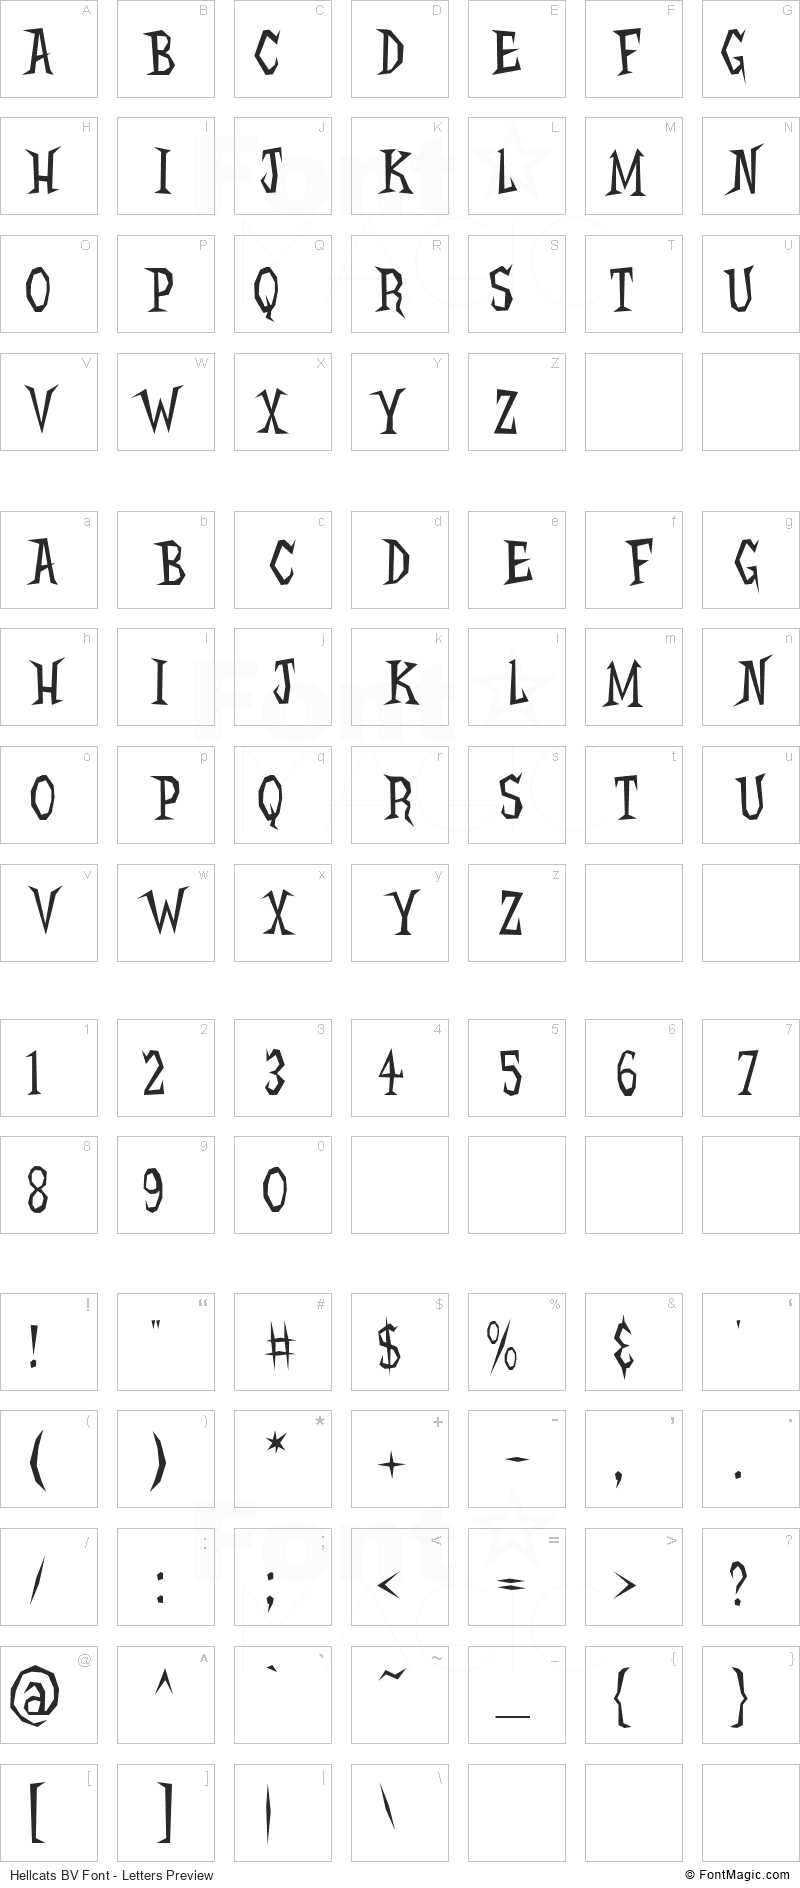 Hellcats BV Font - All Latters Preview Chart